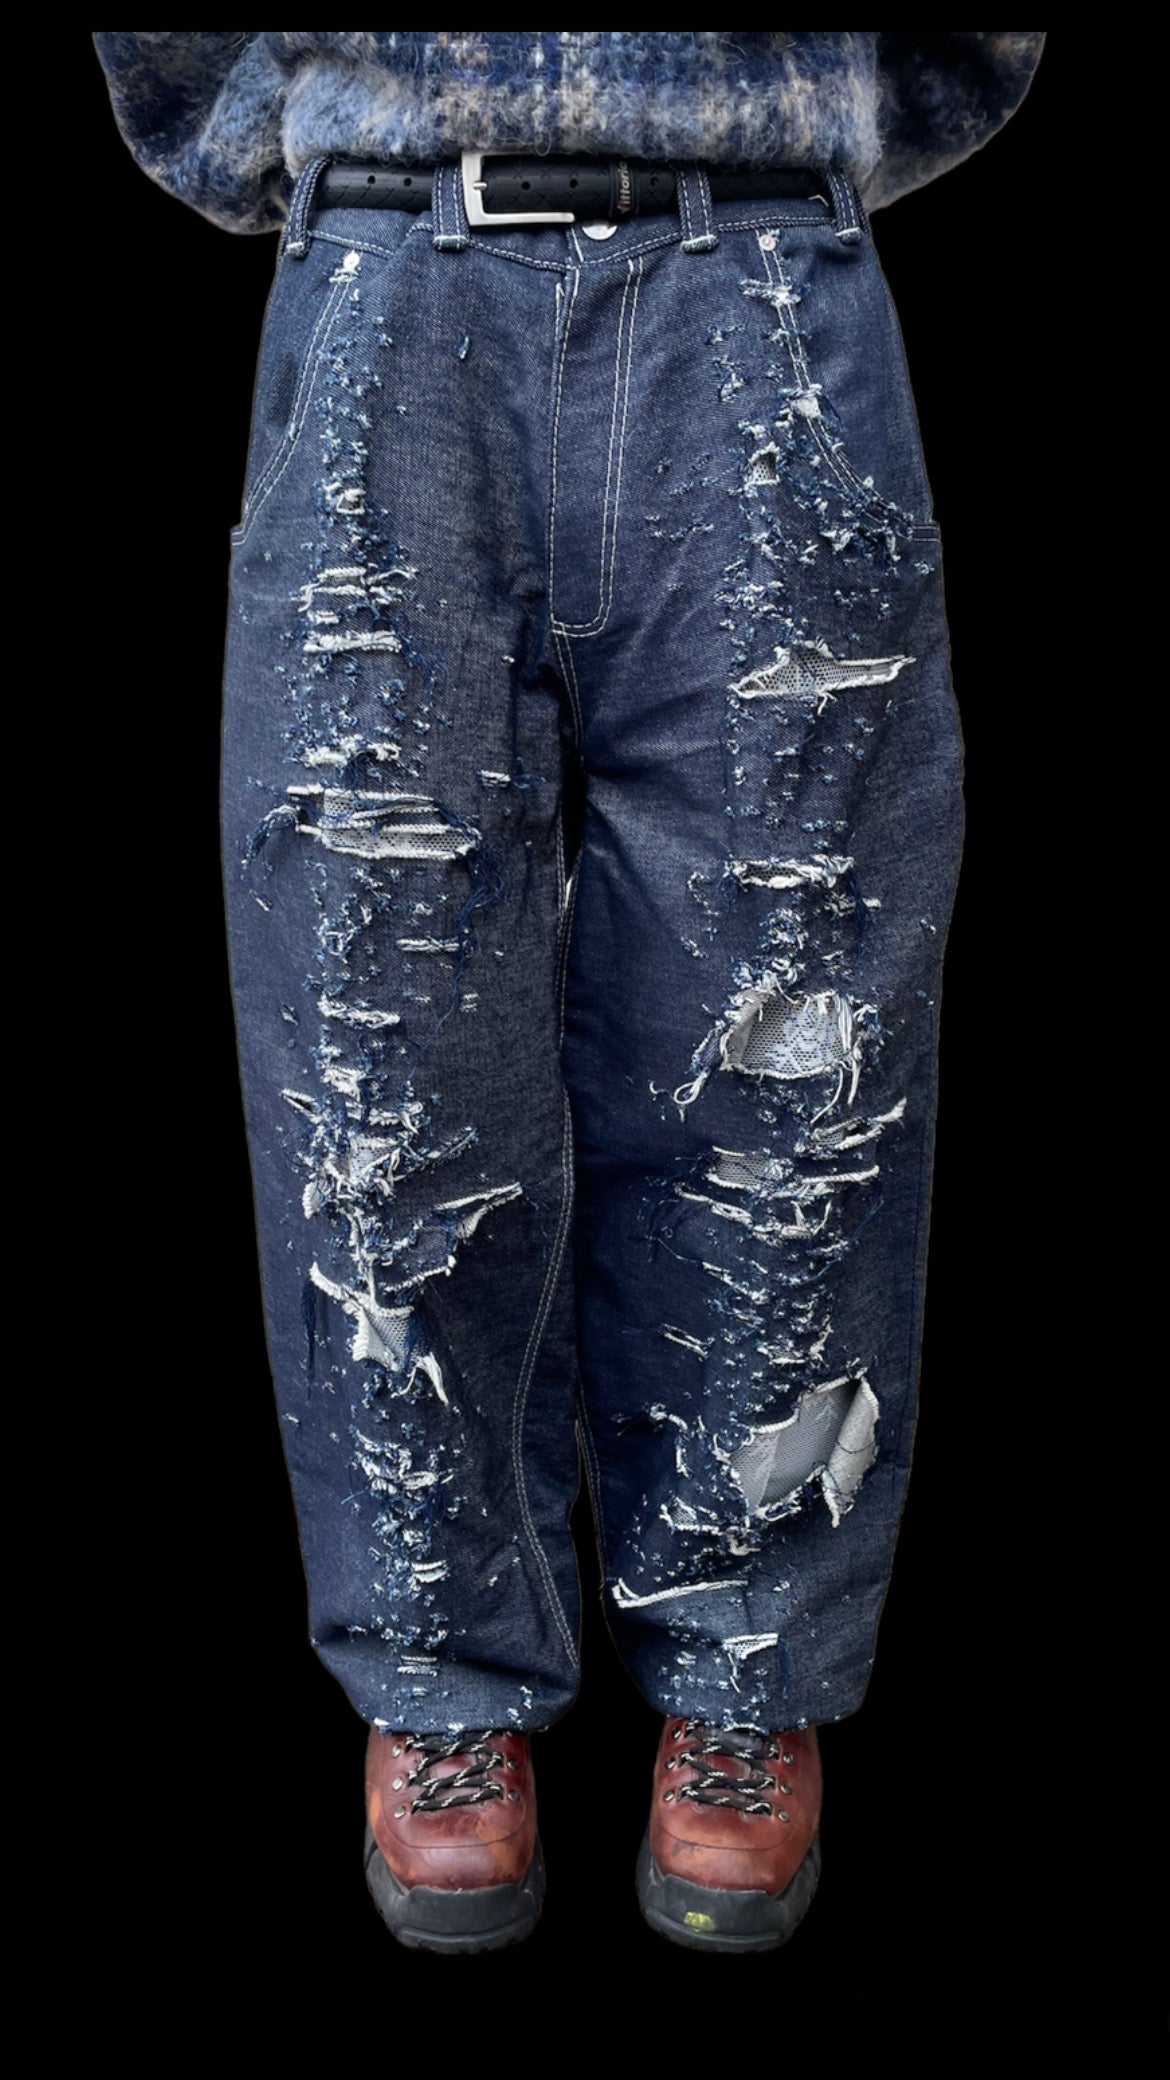 Distressed “lace” jeans